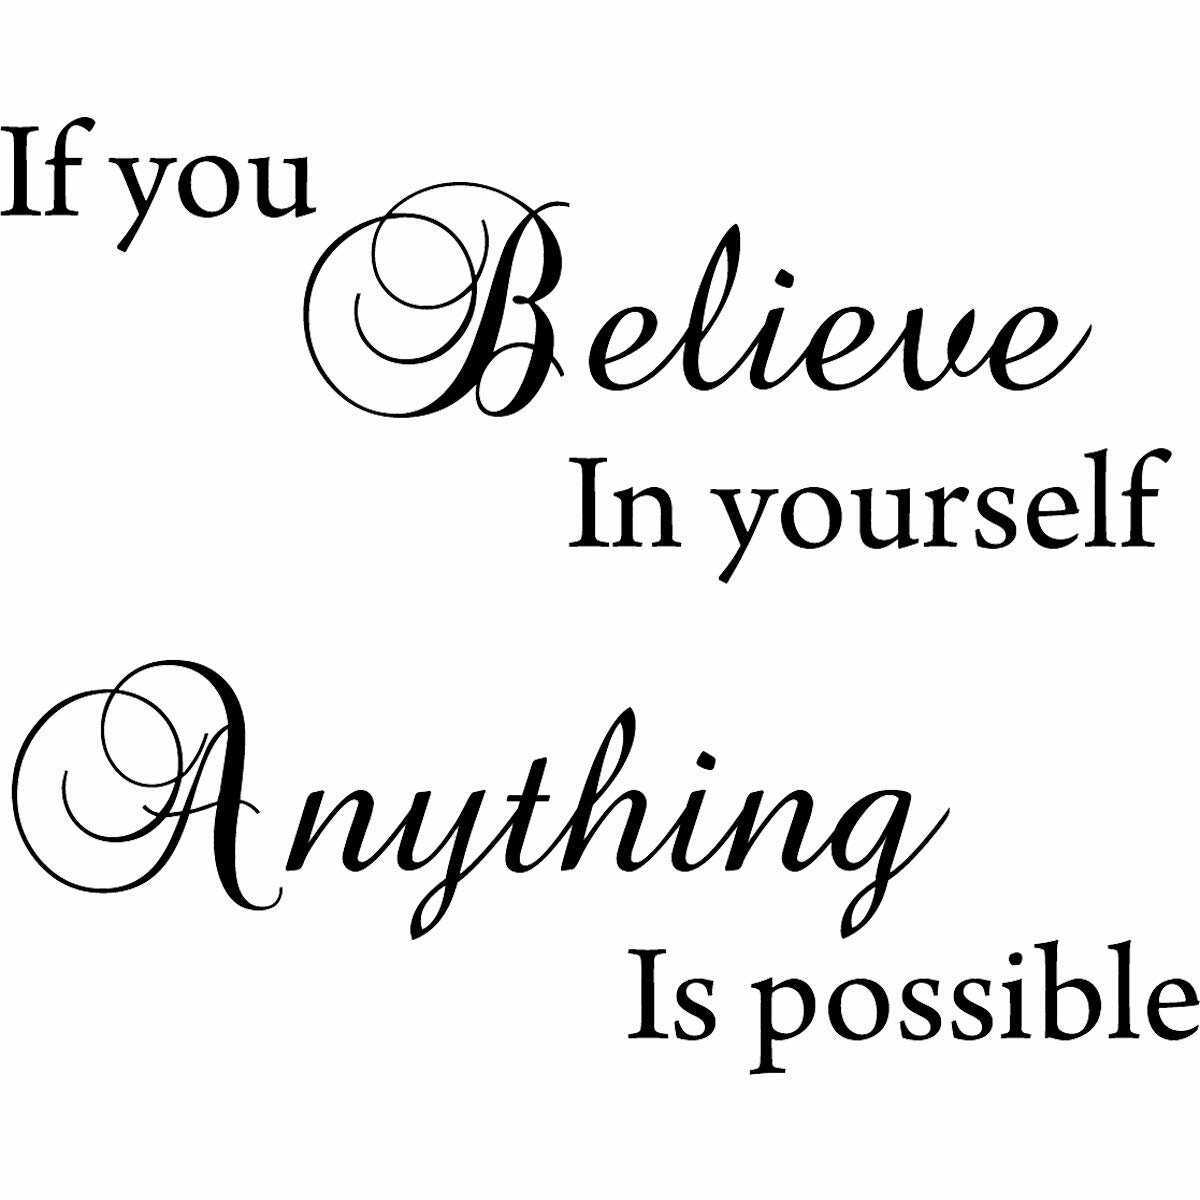 Anything is possible. If you believe in yourself anything is possible. Обои believe in yourself. Believe in yourself с днём рождения. Anything is possible кепка.